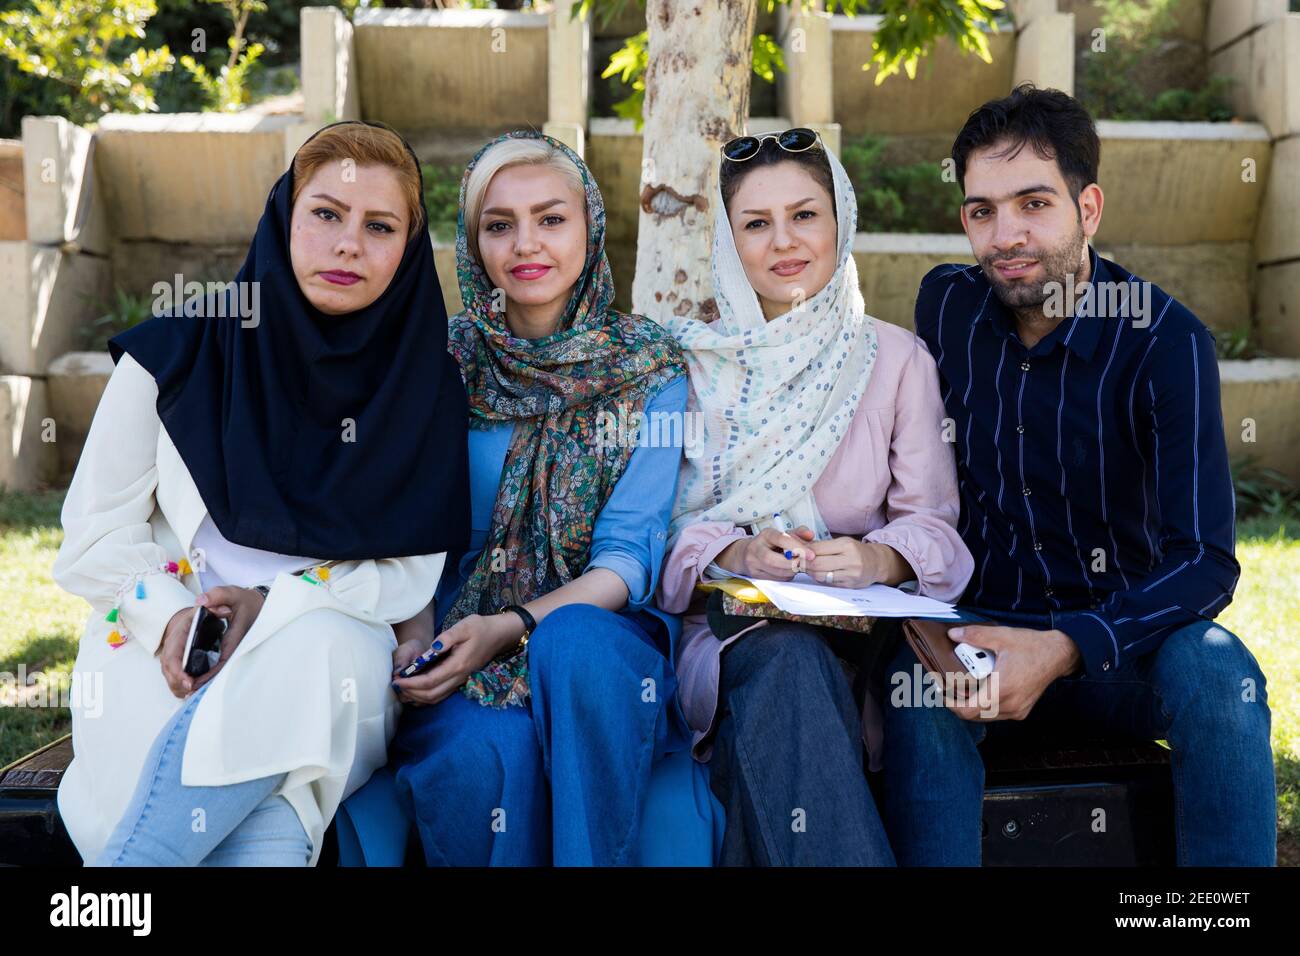 Young Iranians posing in modern Islamic clothes, women wearing headscarves in the city Tehran, Iran Stock Photo